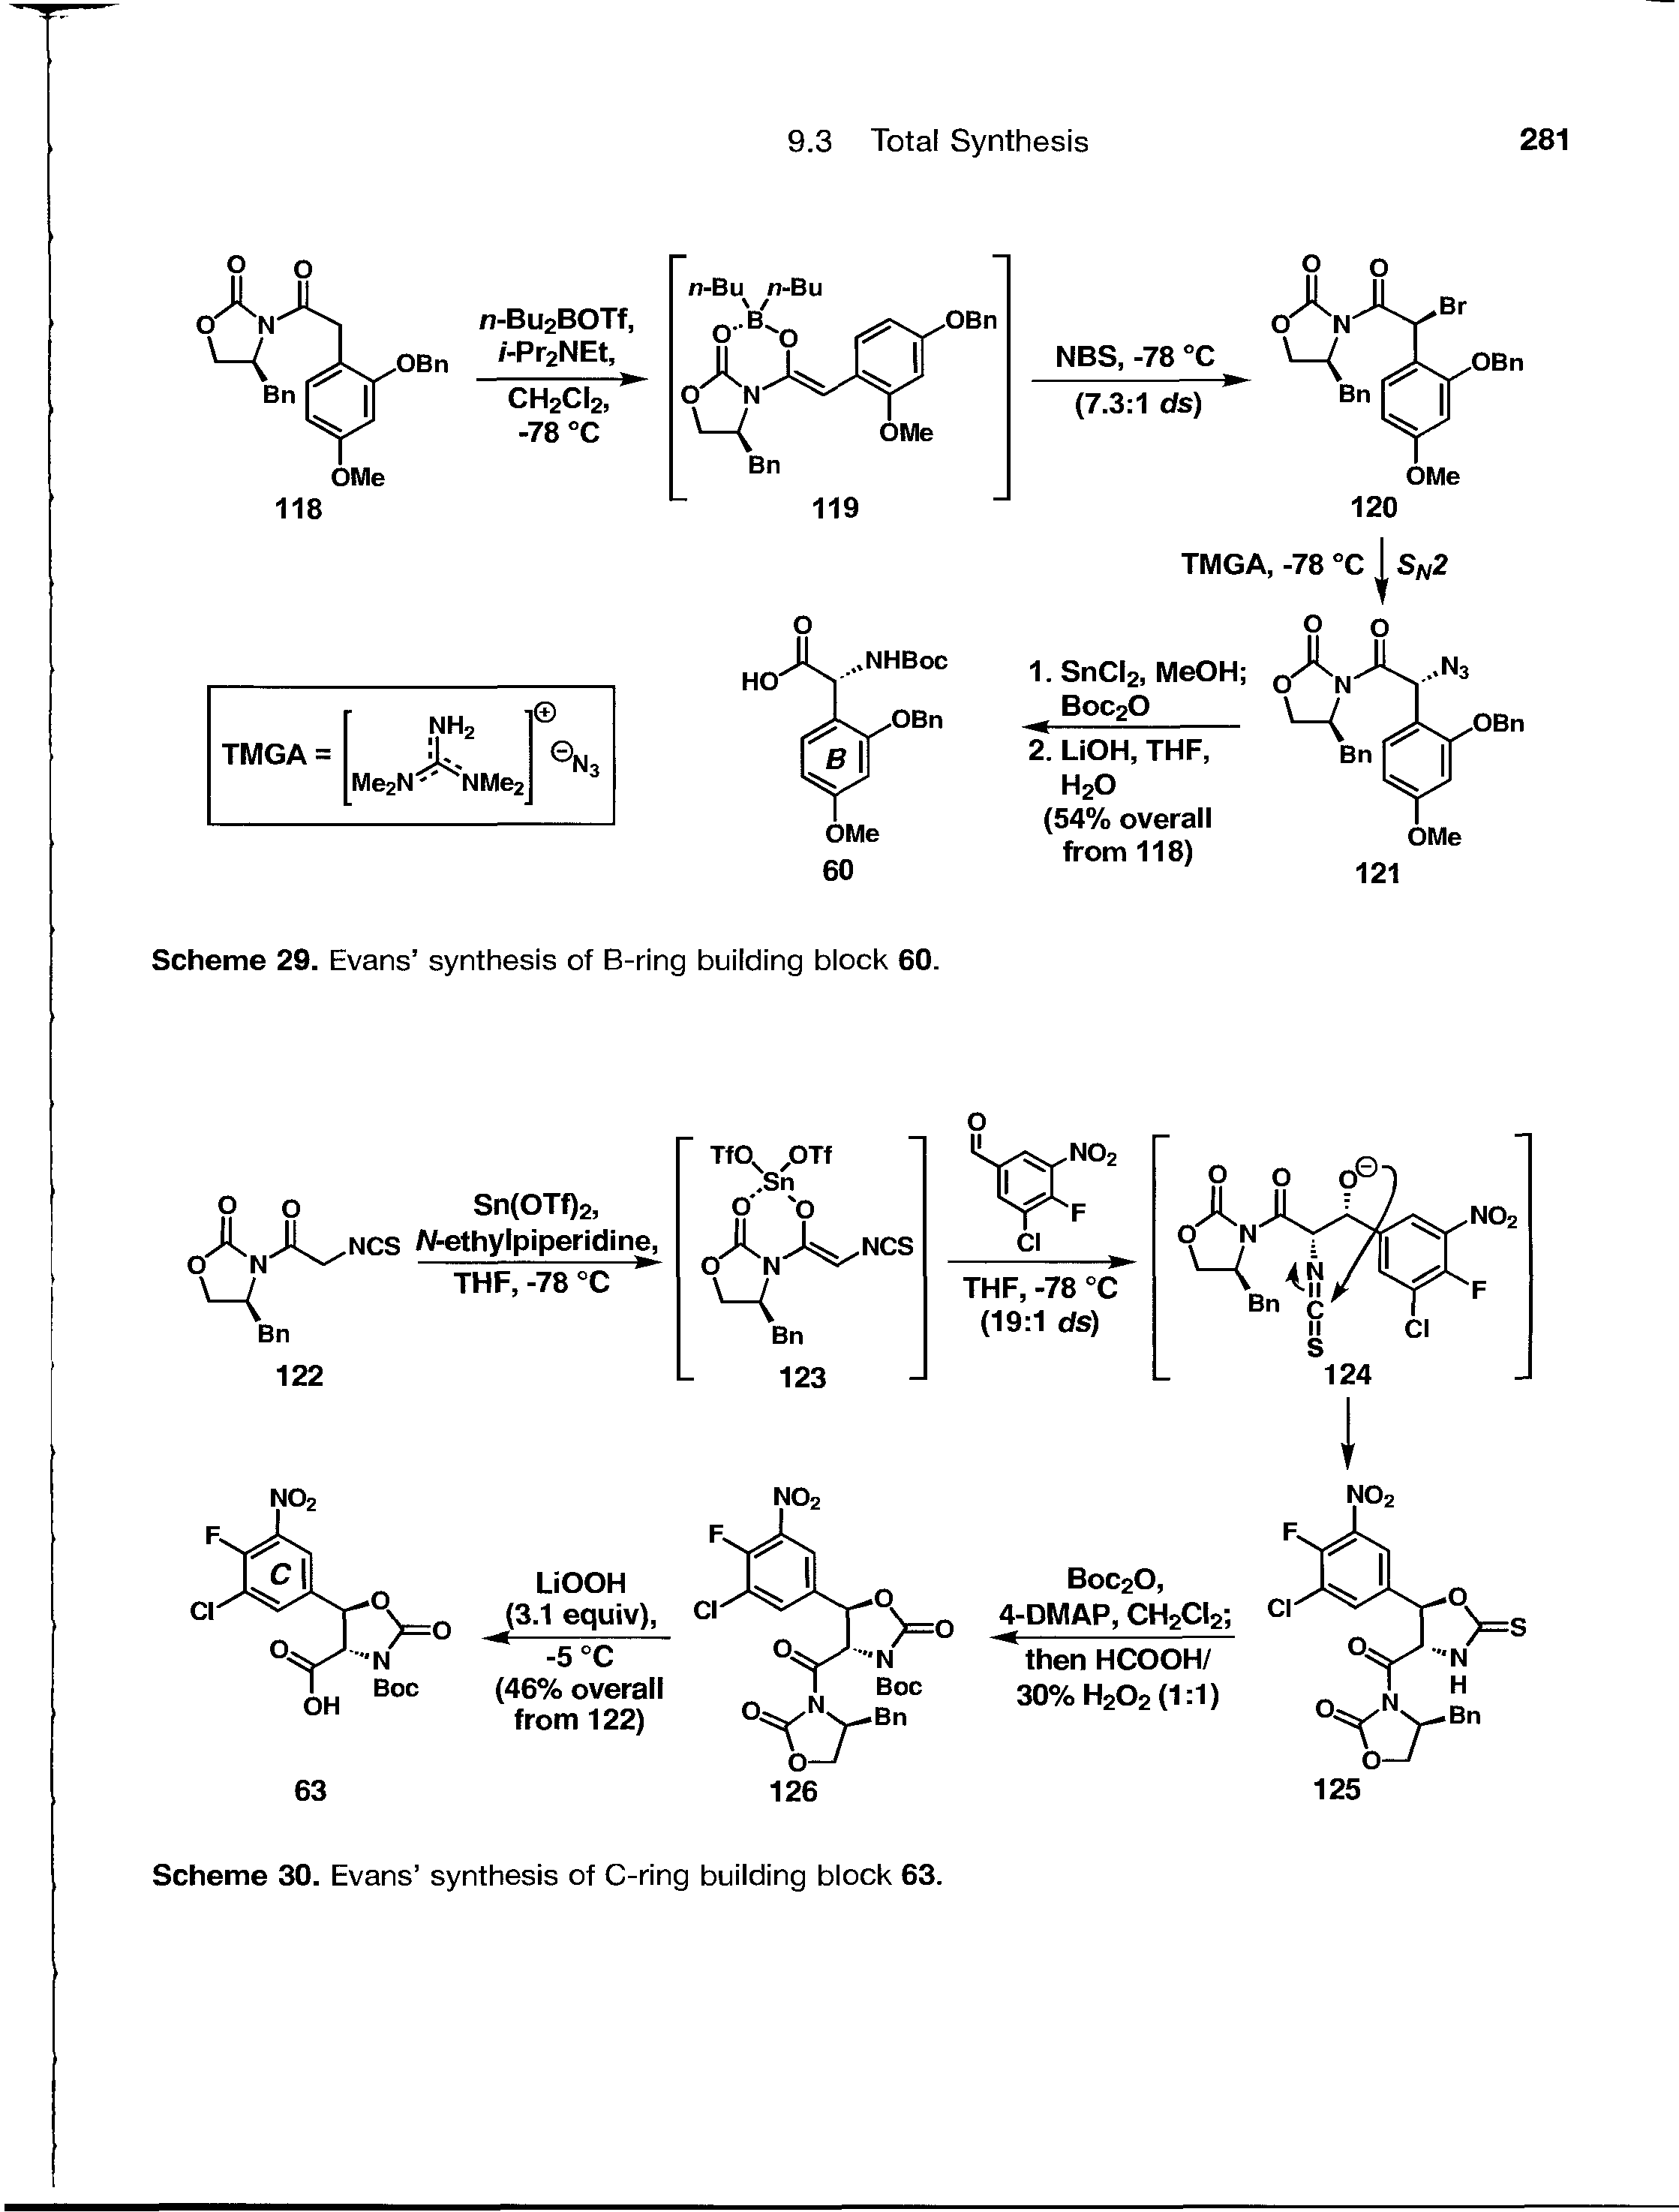 Scheme 29. Evans synthesis of B-ring building block 60.